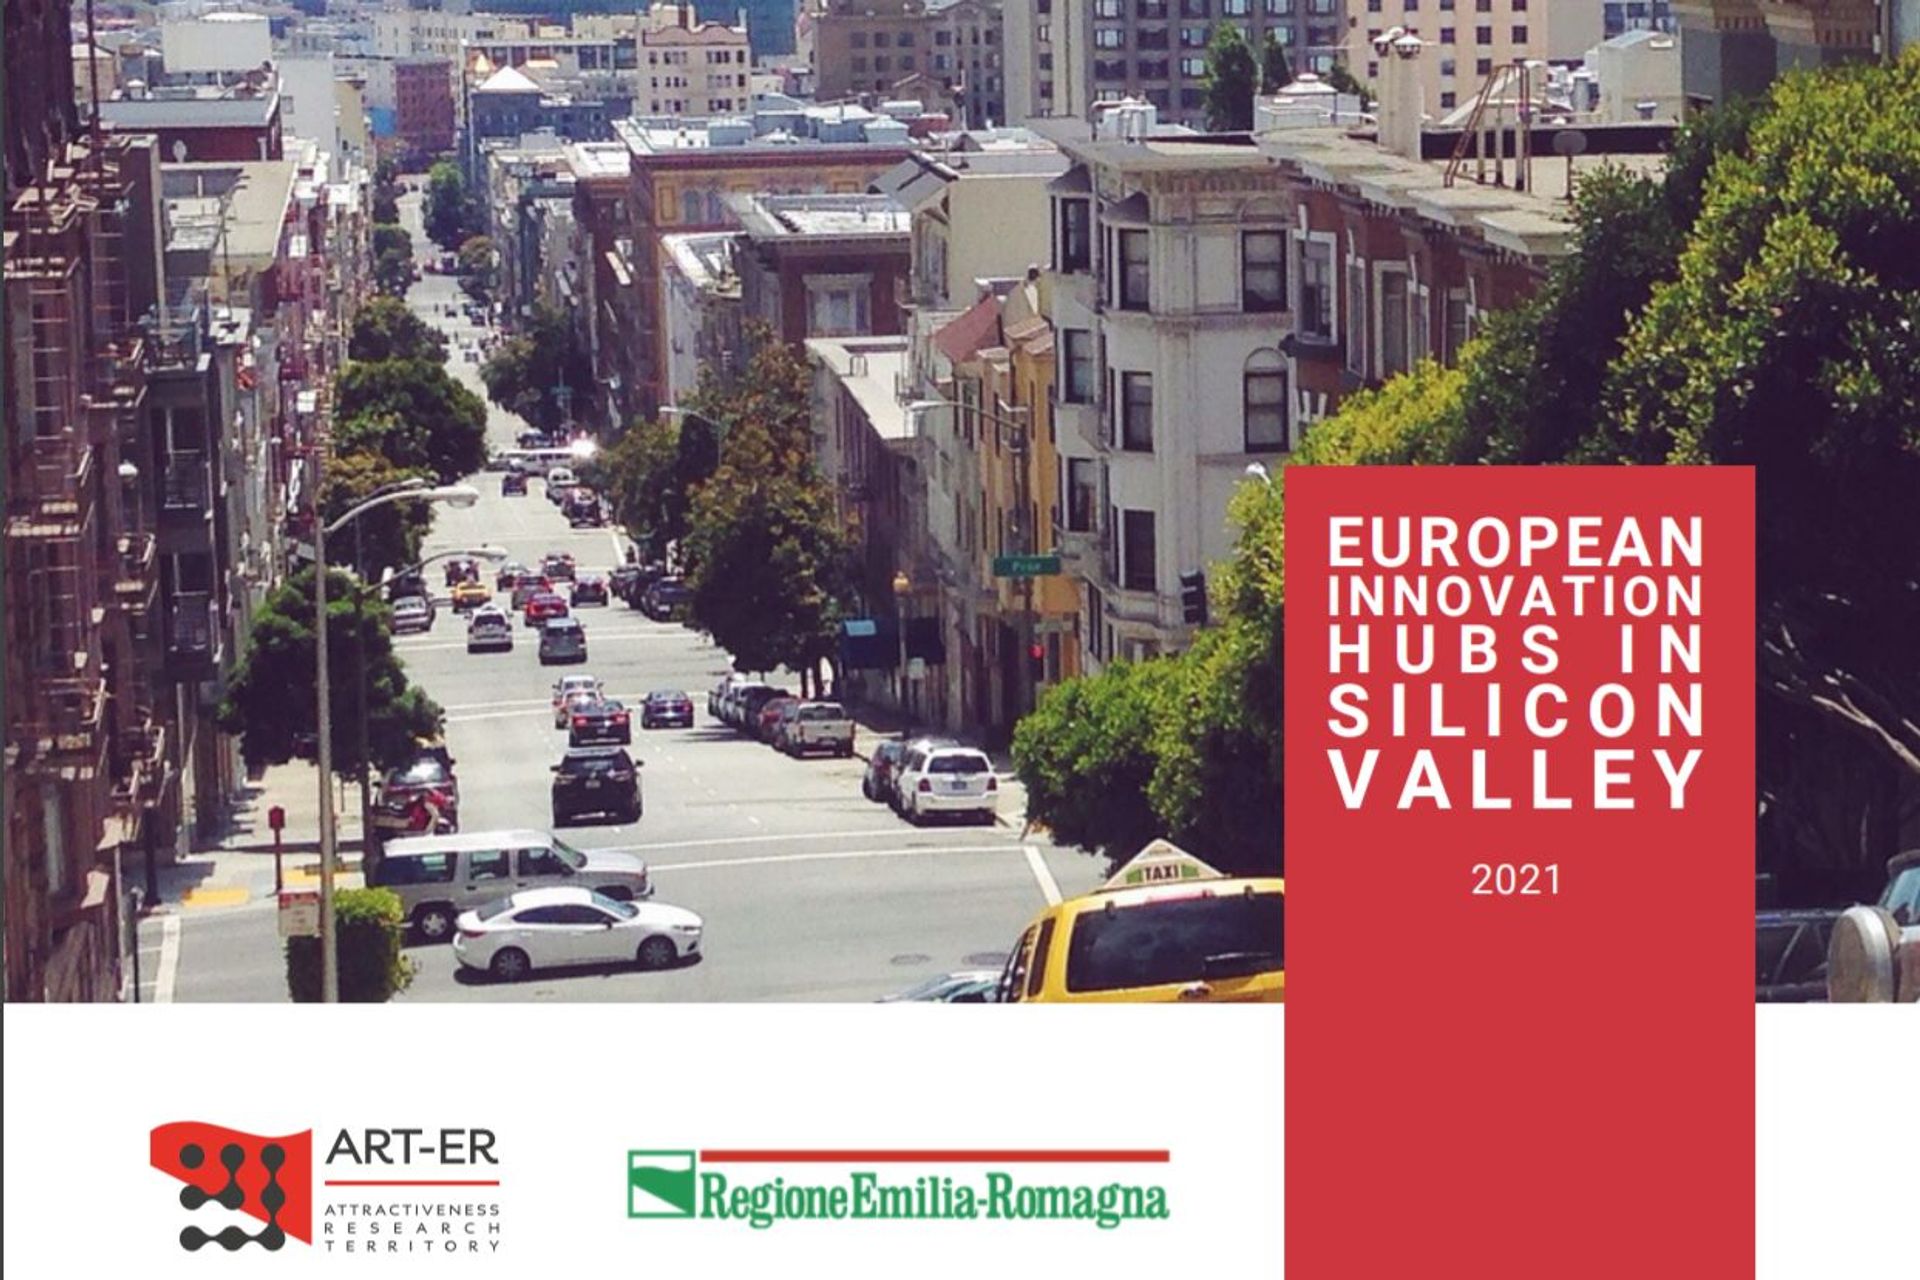 The cover of the report “European Innovation Hubs in Silicon Valley 2021”